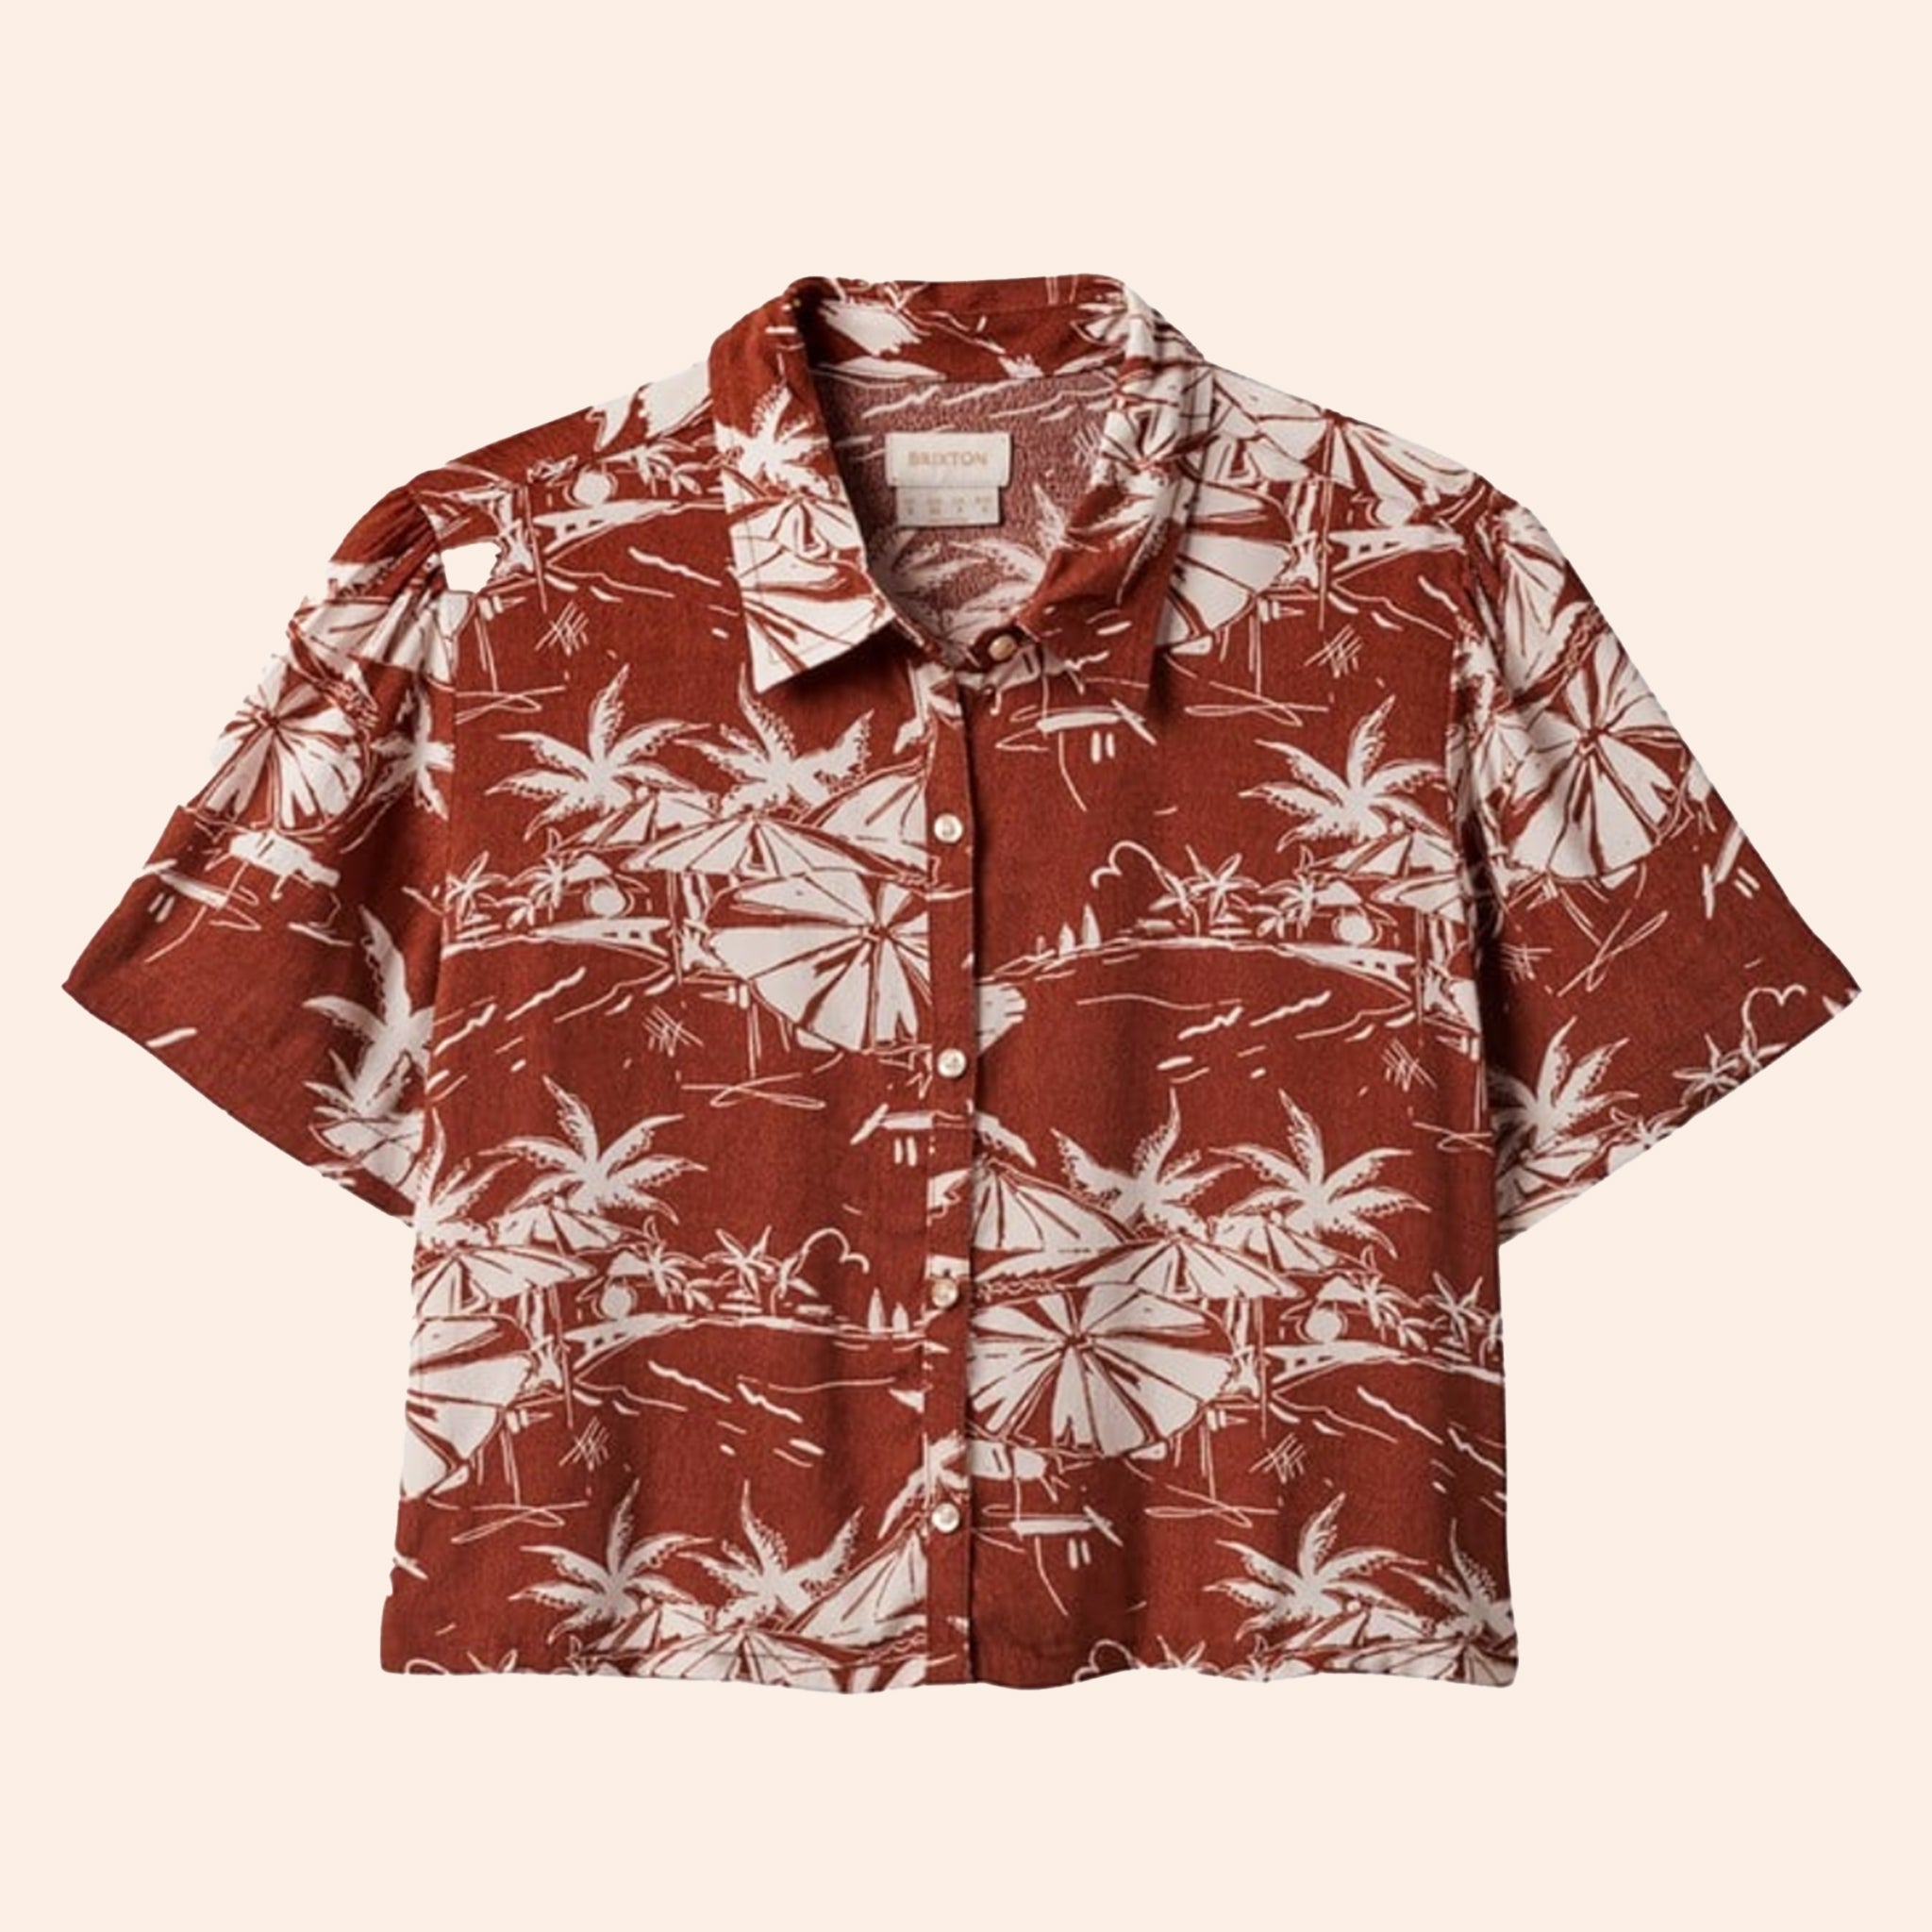 A rust colored button up short sleeve shirt with an ivory tropical print.